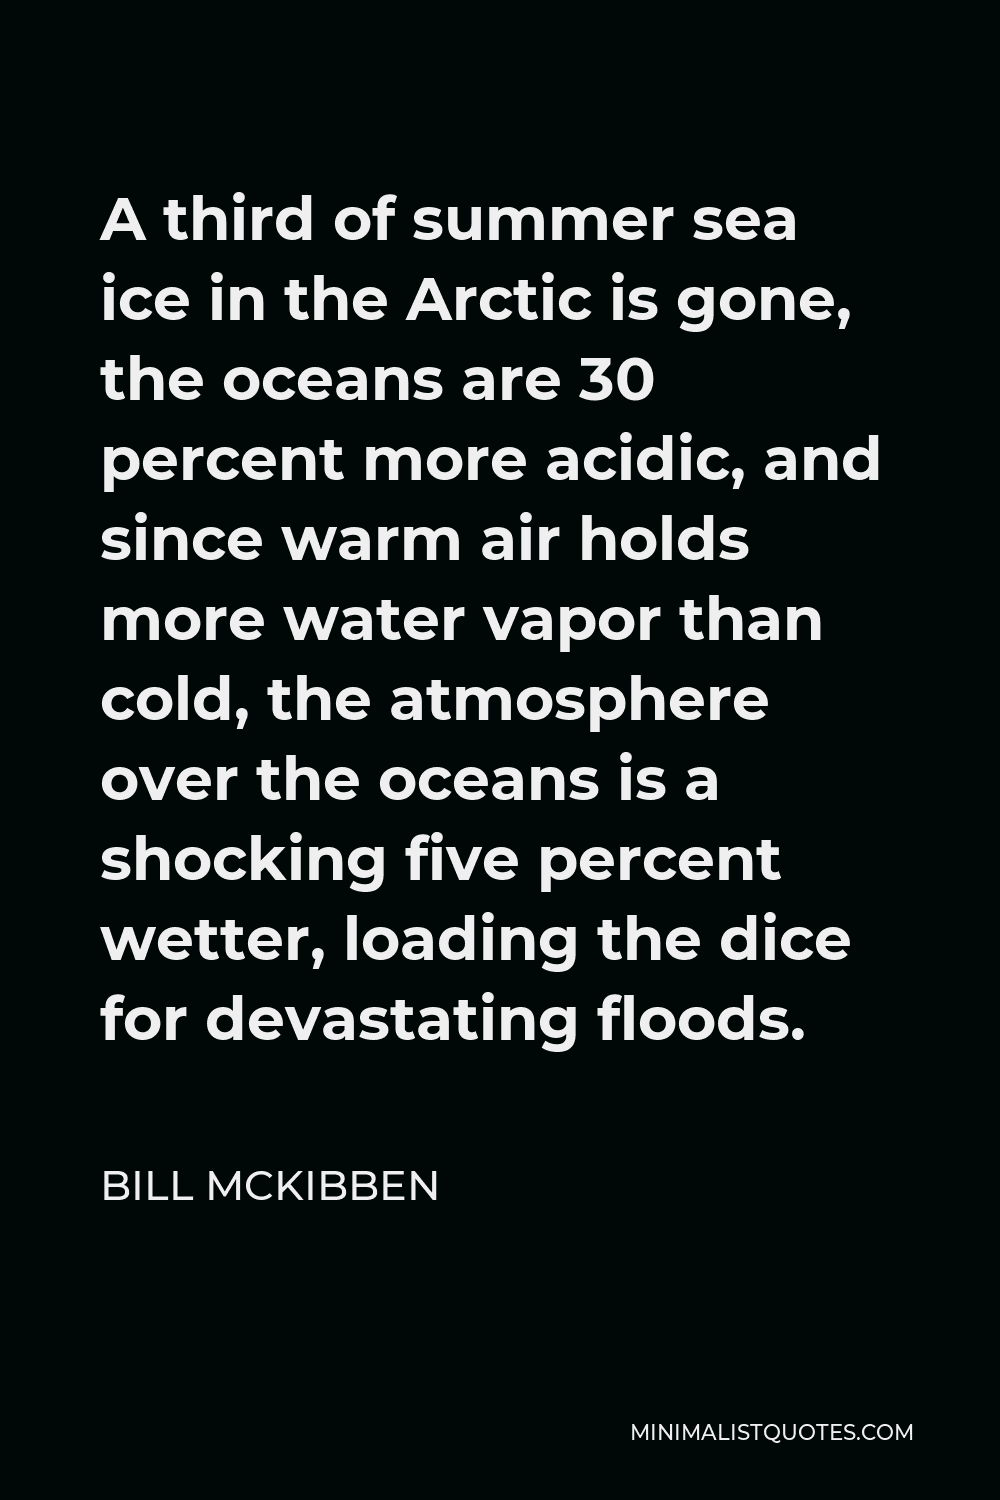 Bill McKibben Quote - A third of summer sea ice in the Arctic is gone, the oceans are 30 percent more acidic, and since warm air holds more water vapor than cold, the atmosphere over the oceans is a shocking five percent wetter, loading the dice for devastating floods.